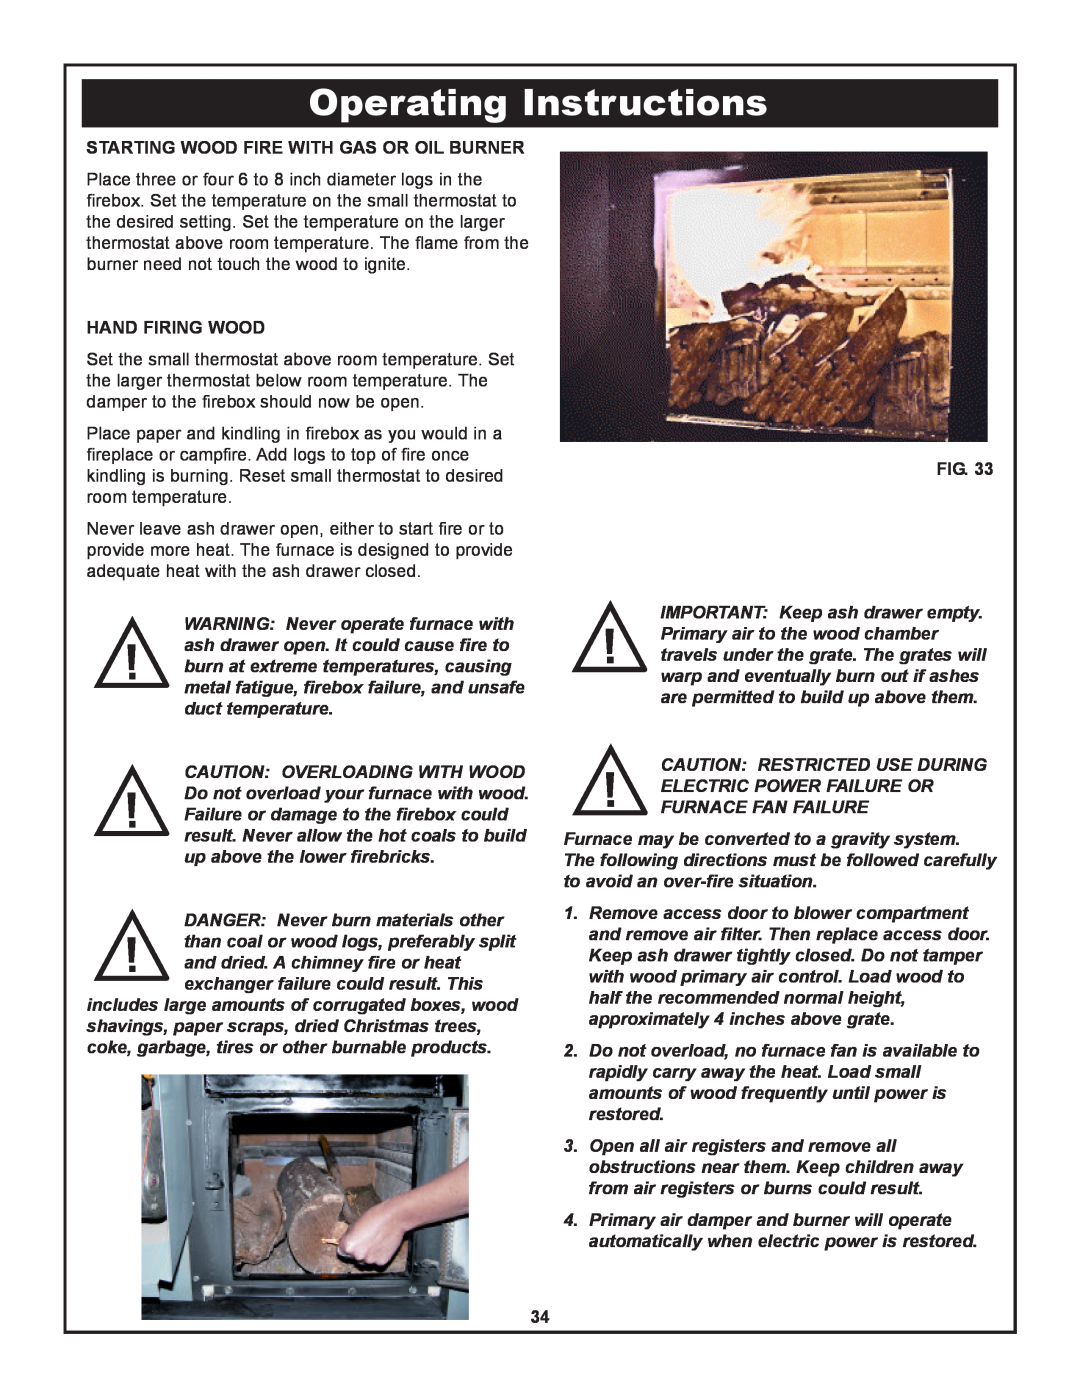 Yukon Advanced Optics Oil Furnace Operating Instructions, Starting Wood Fire With Gas Or Oil Burner, Hand Firing Wood 